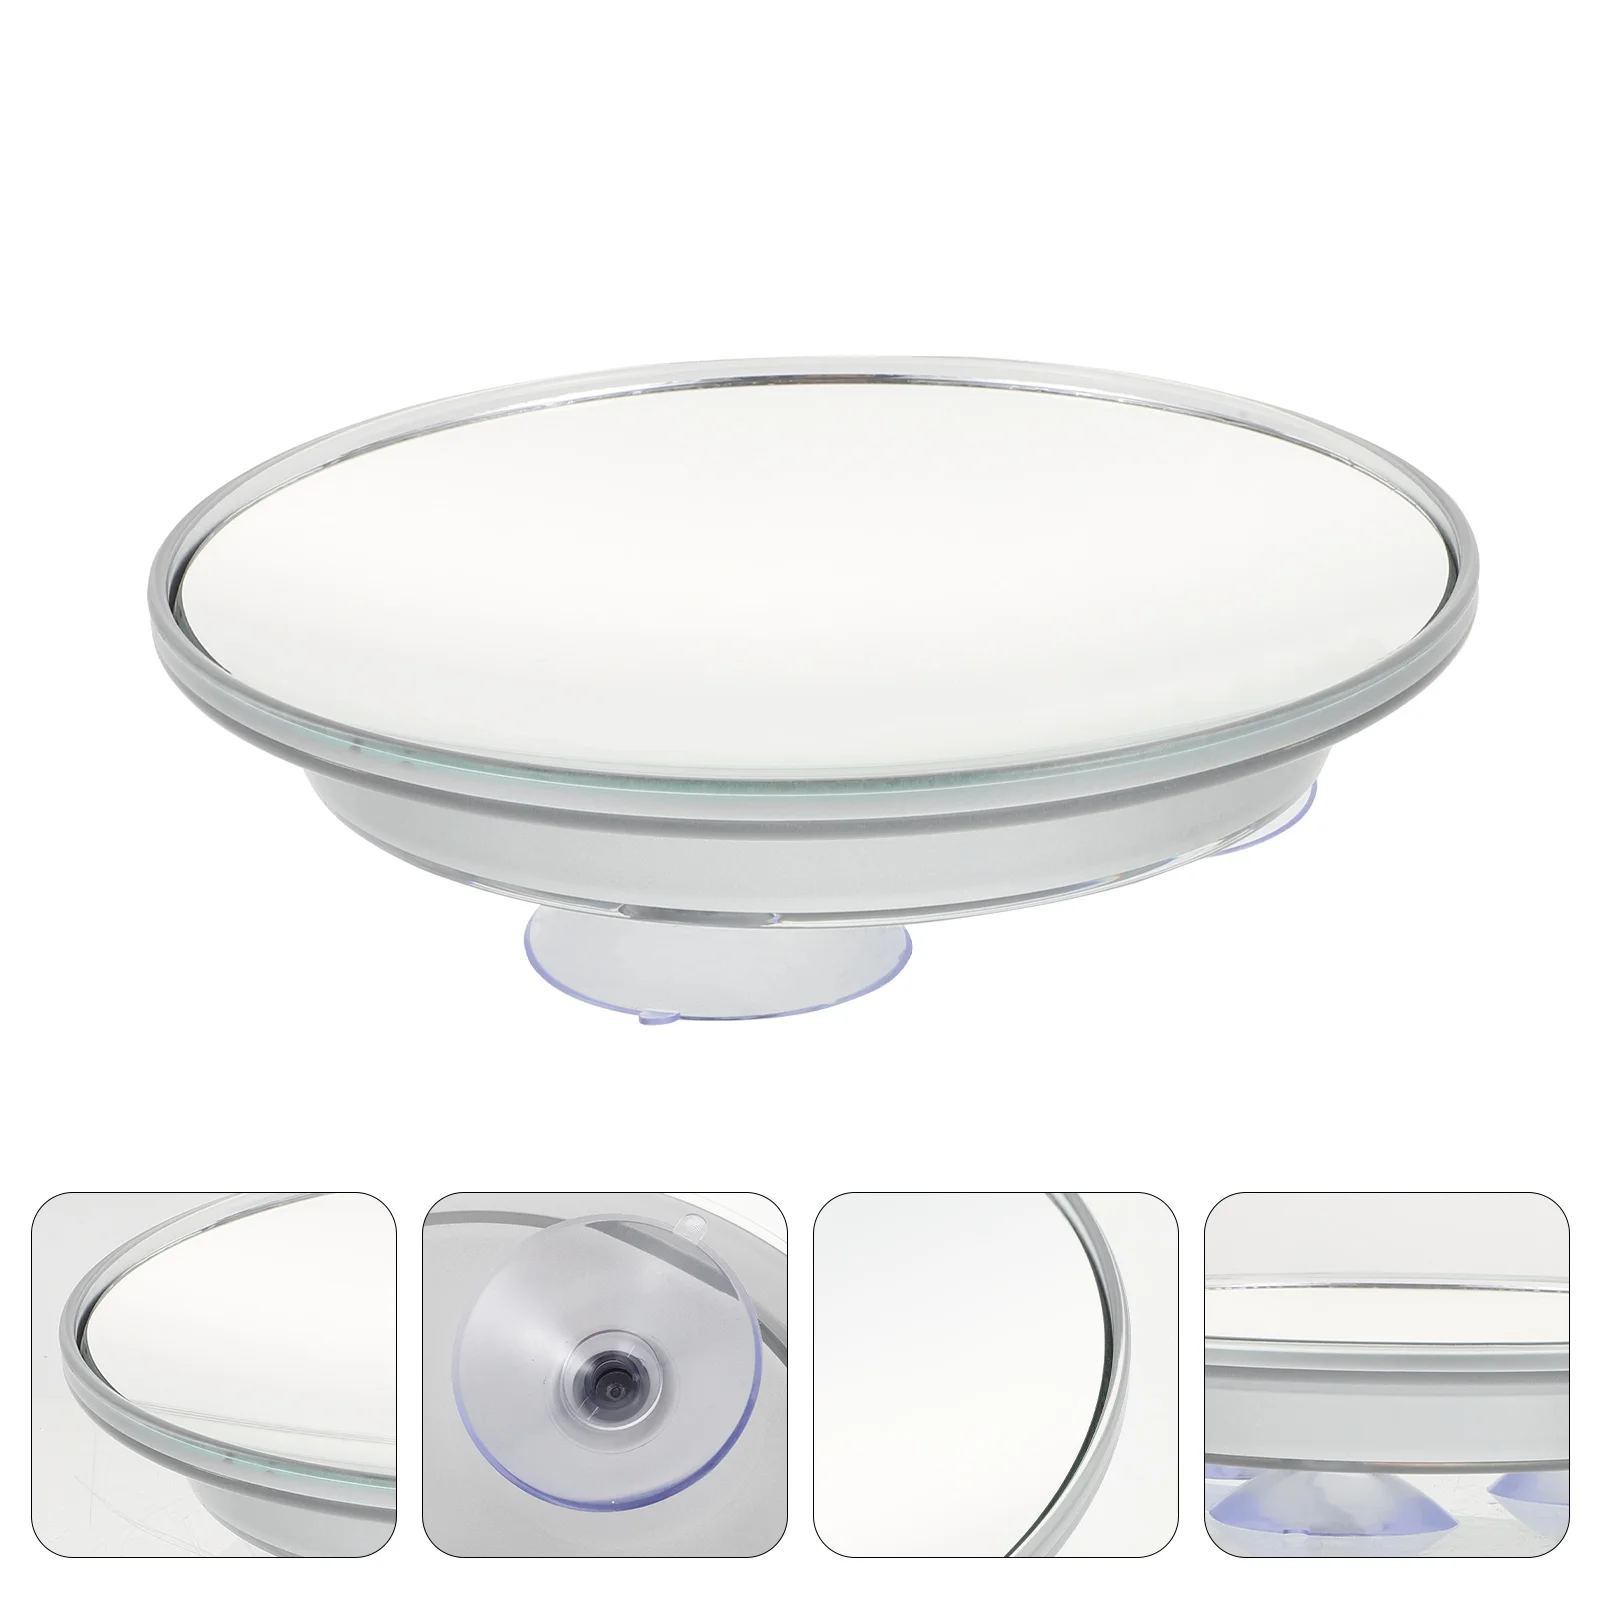 High Magnification Bathroom Mirror Flexible Makeup Mirror 20X Magnifying Mirror With Suction Cups Cosmetics Tools Round Mirror bathroom cabinet high gloss white 32x25 5x190 cm chipboard